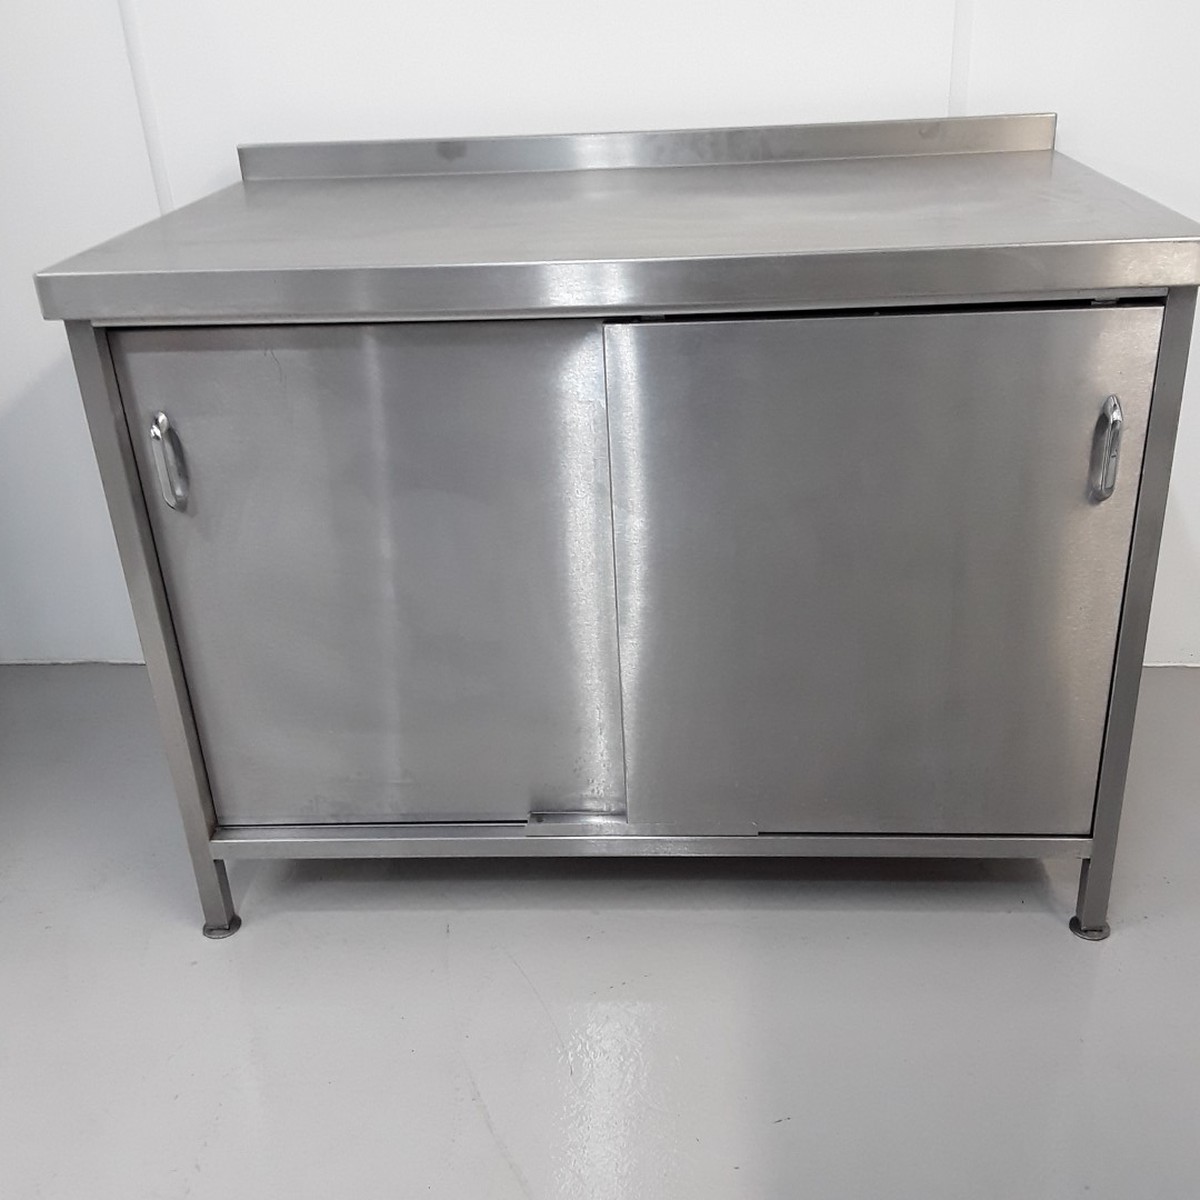 Secondhand Catering Equipment Kitchen Cupboards And Cabinets Used